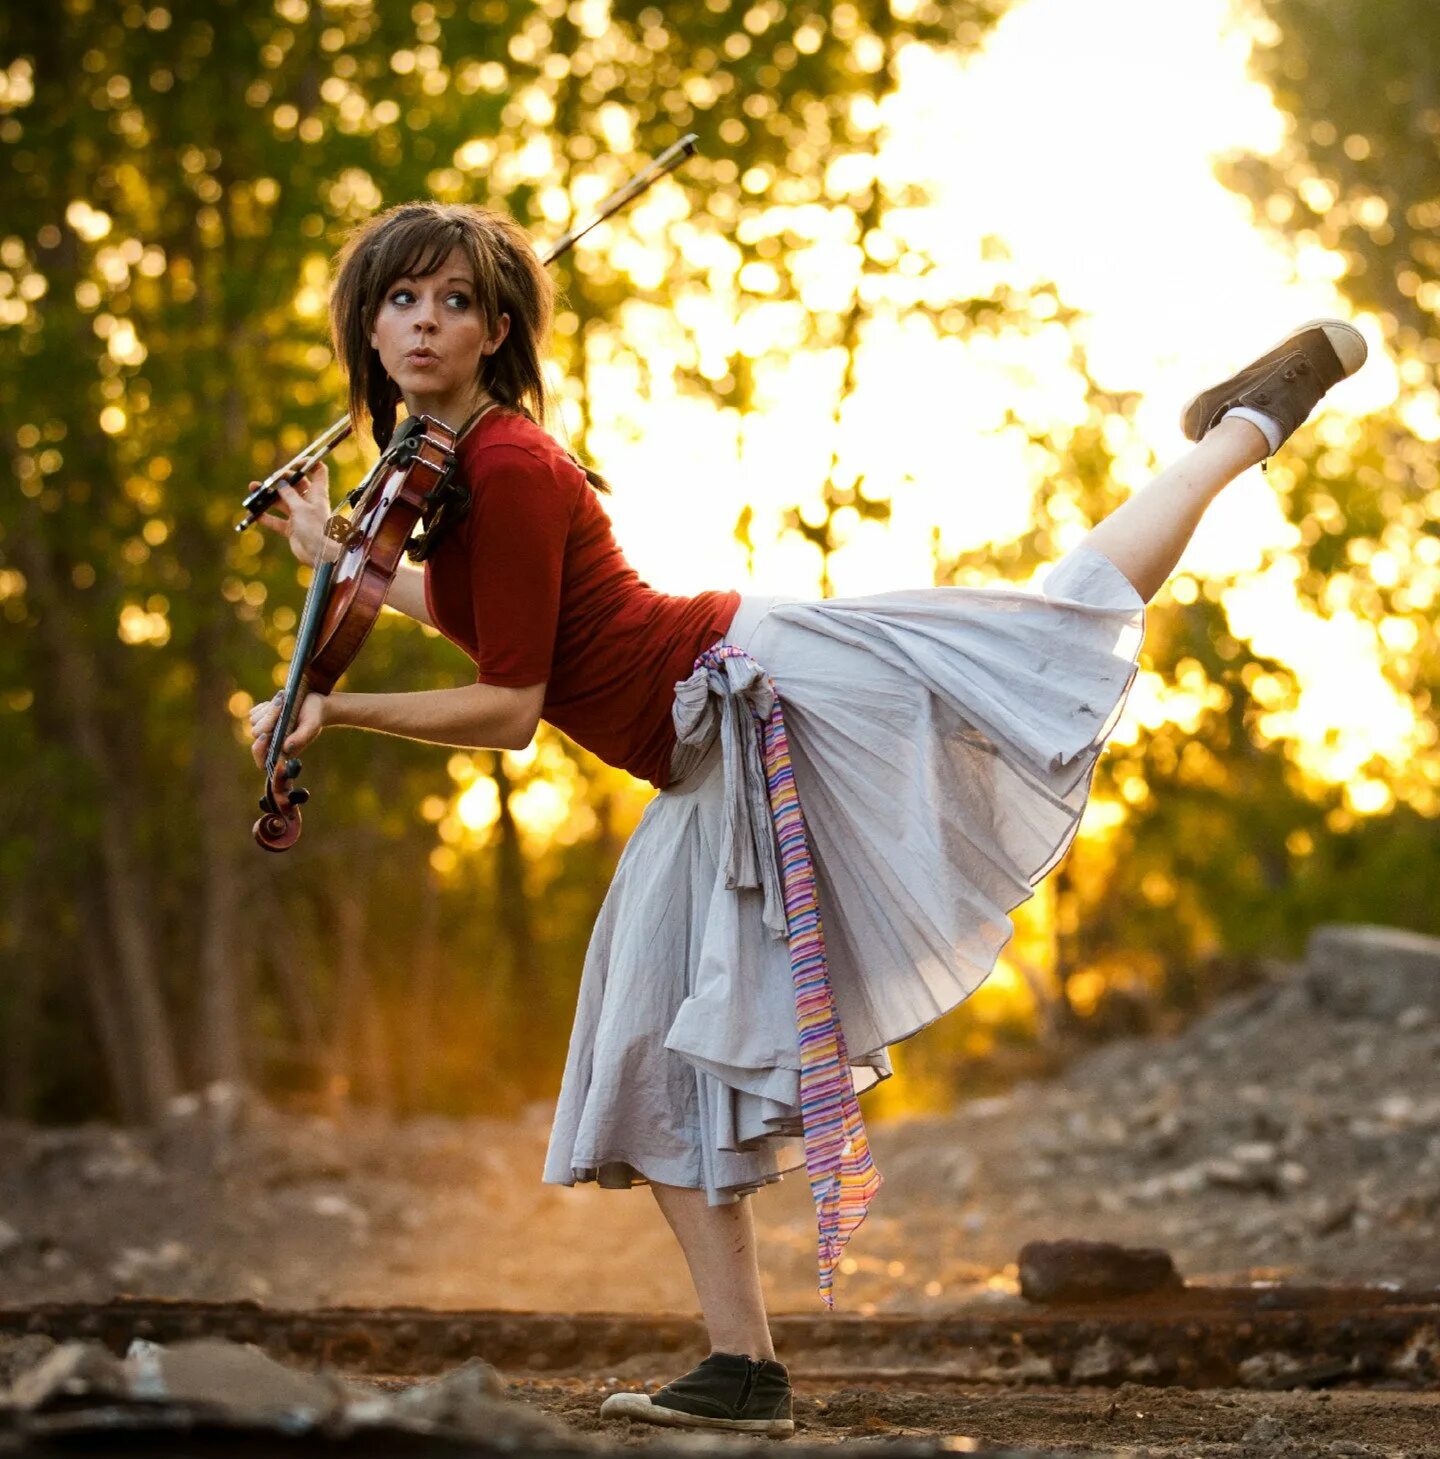 Lindsey stirling eye of the untold her. Линдси Стирлинг. Линдси Стирлинг 2022. Скрипачка Линдси Стирлинг. Lindsey Stirling Линдси Стирлинг русофоб?.